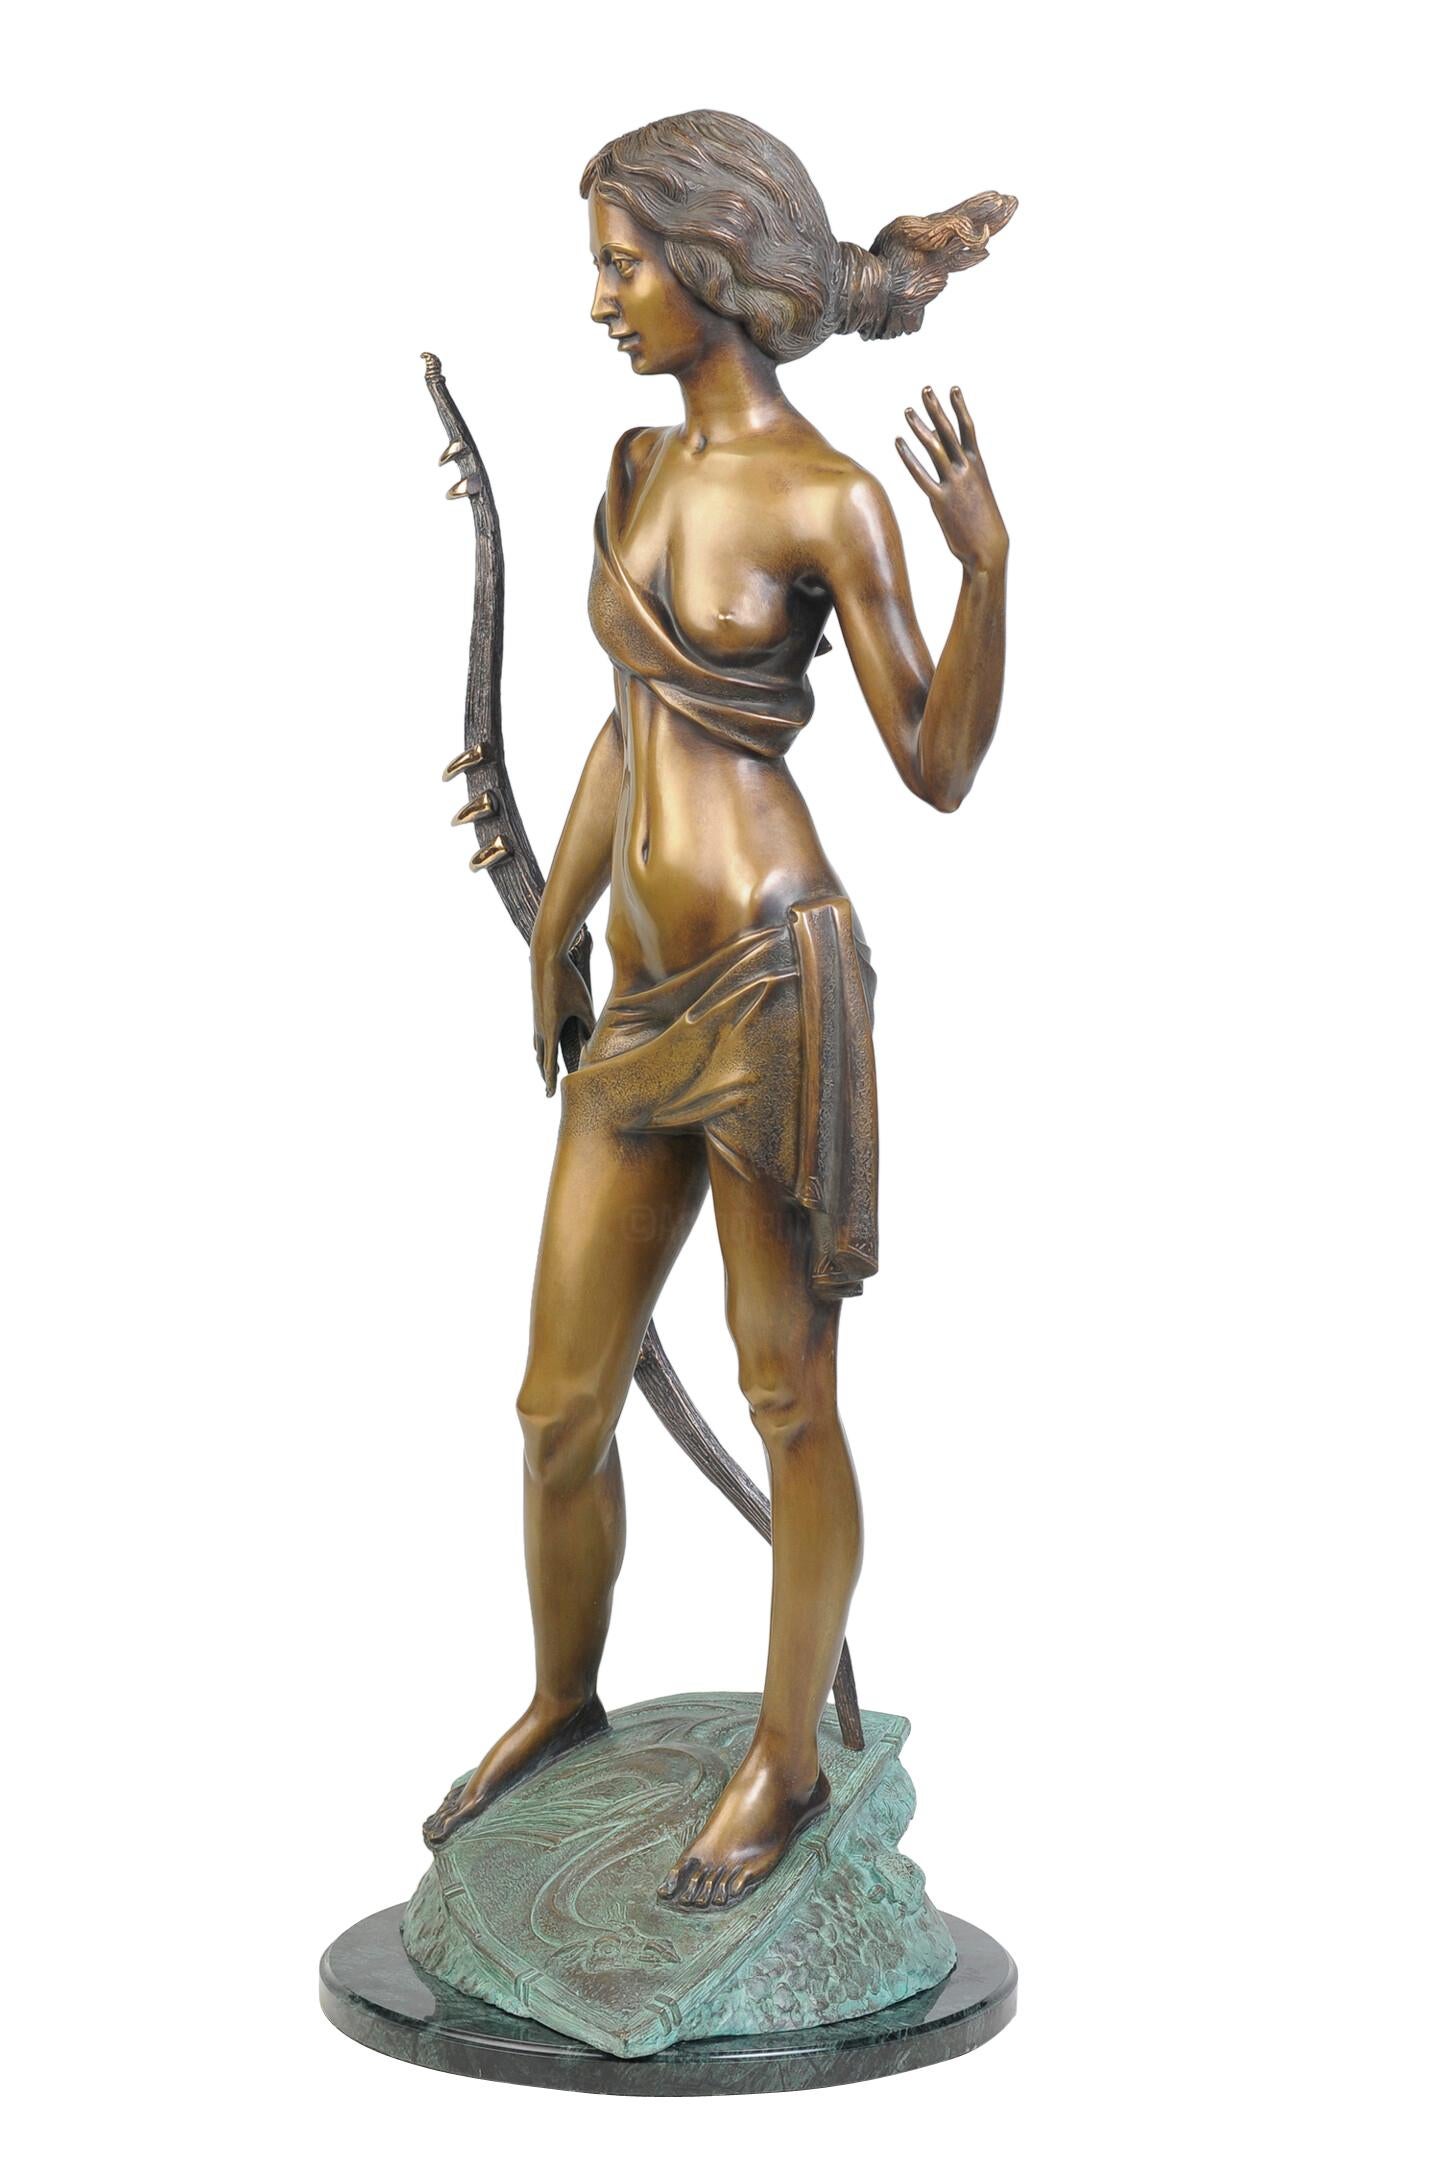 Volodymyr Mykytenko - Huntress (2006)

Huntress-The sculpture depicts the goddess of the hunt. Always young, virgin goddess, patroness of all life on Earth, giving happiness in marriage, goddess of fertility.

Additional information:
Medium: